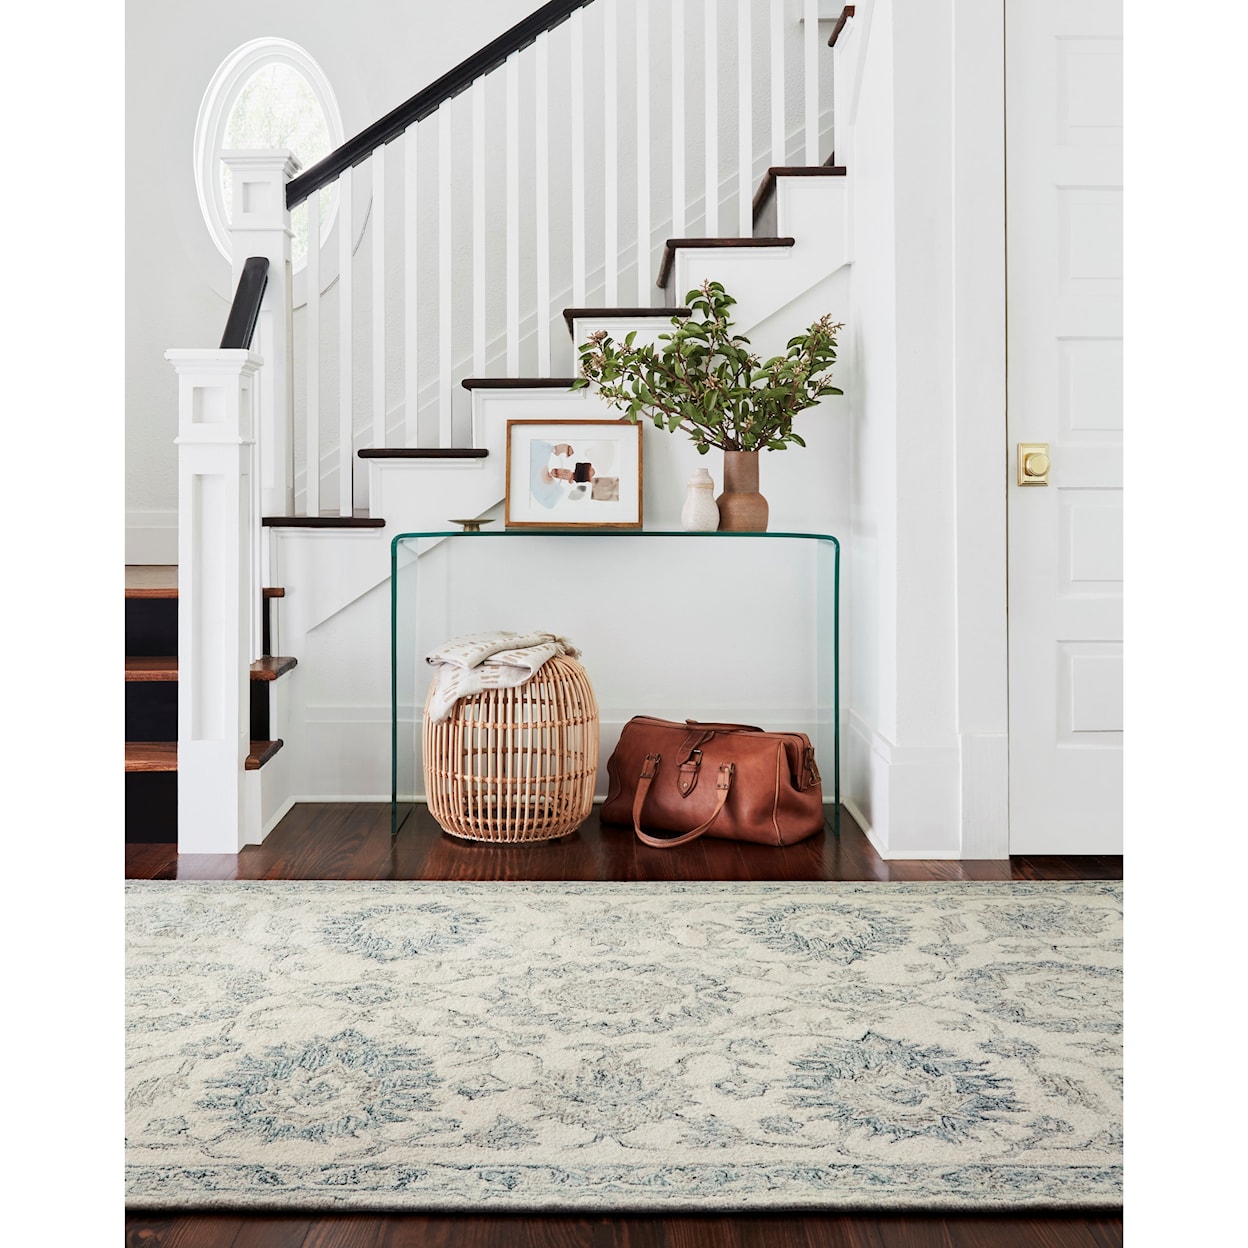 Loloi Rugs Norabel 5'0" x 7'6" Ivory / Blue Rug